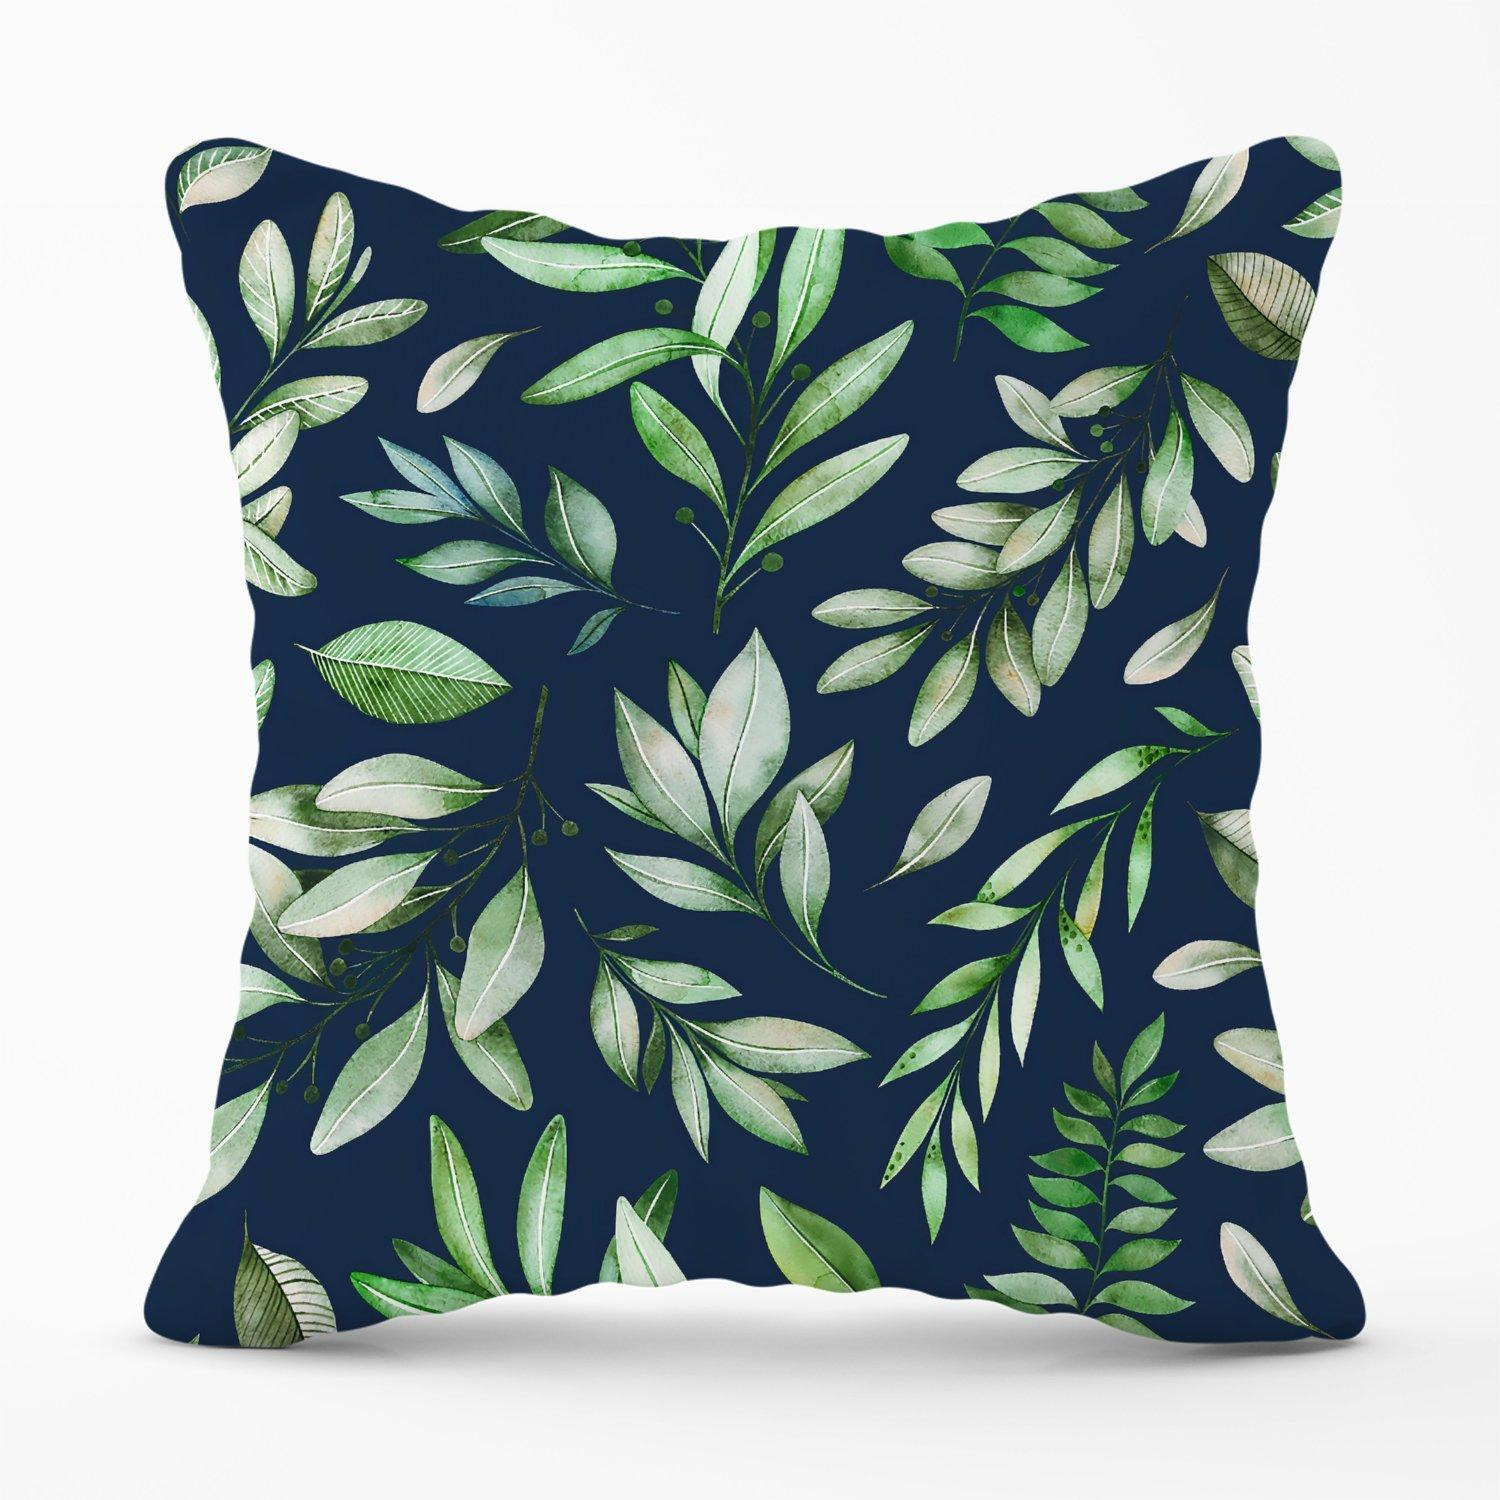 Watercolor Leaves Outdoor Cushion - image 1